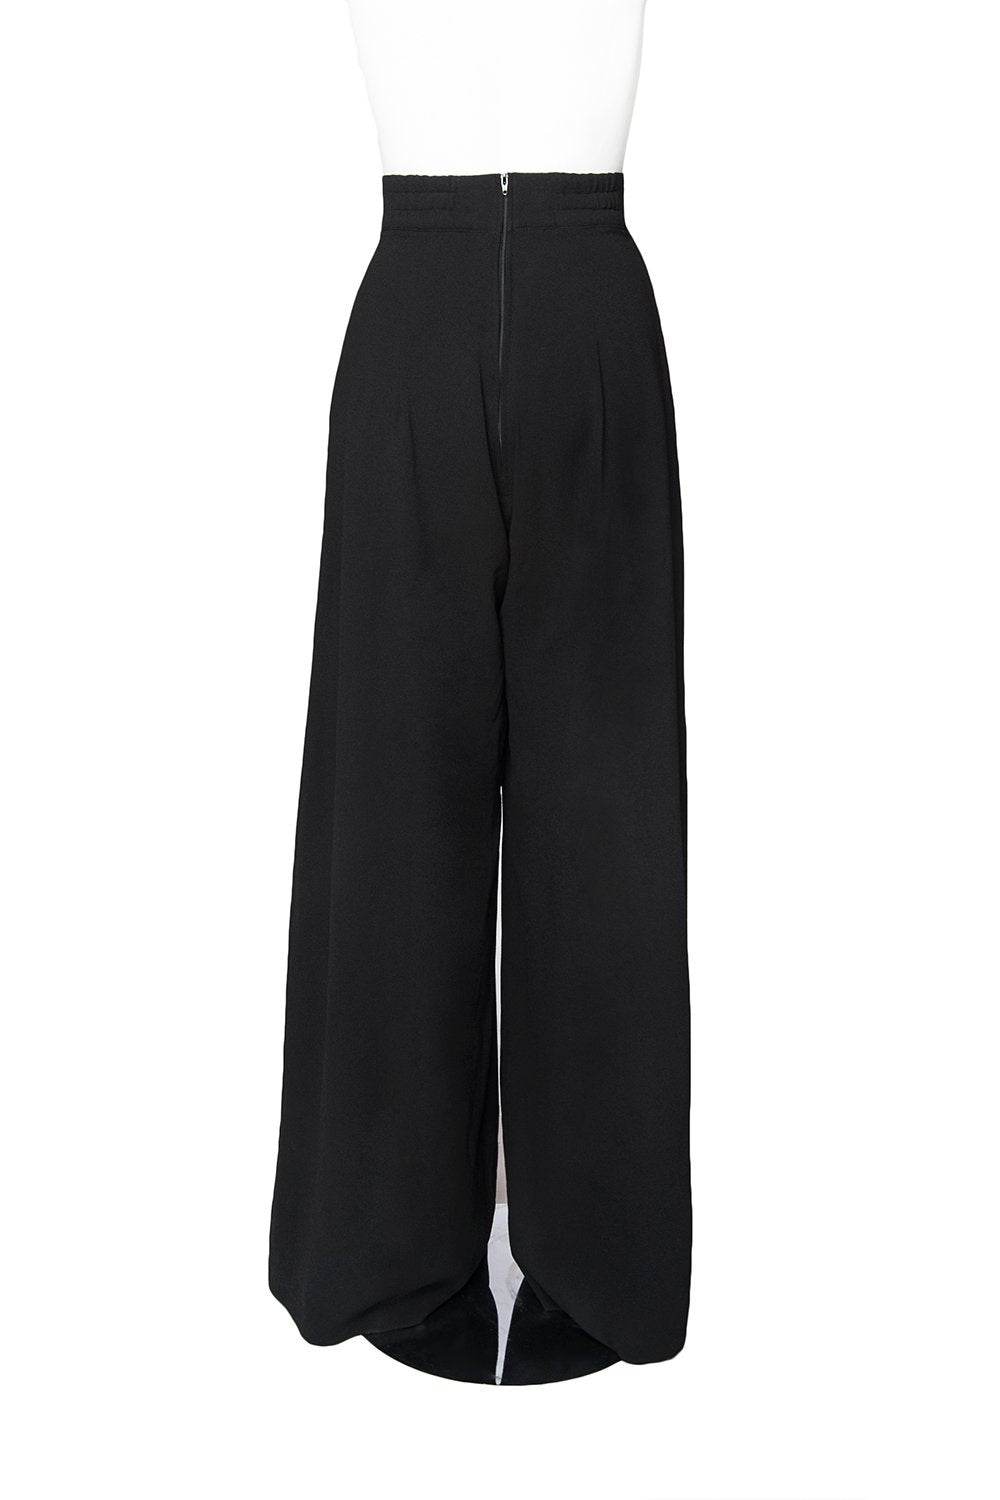 Laura Byrnes California Dietrich Wide Leg Trouser Palazzo Pants in Black with 30" Inseam